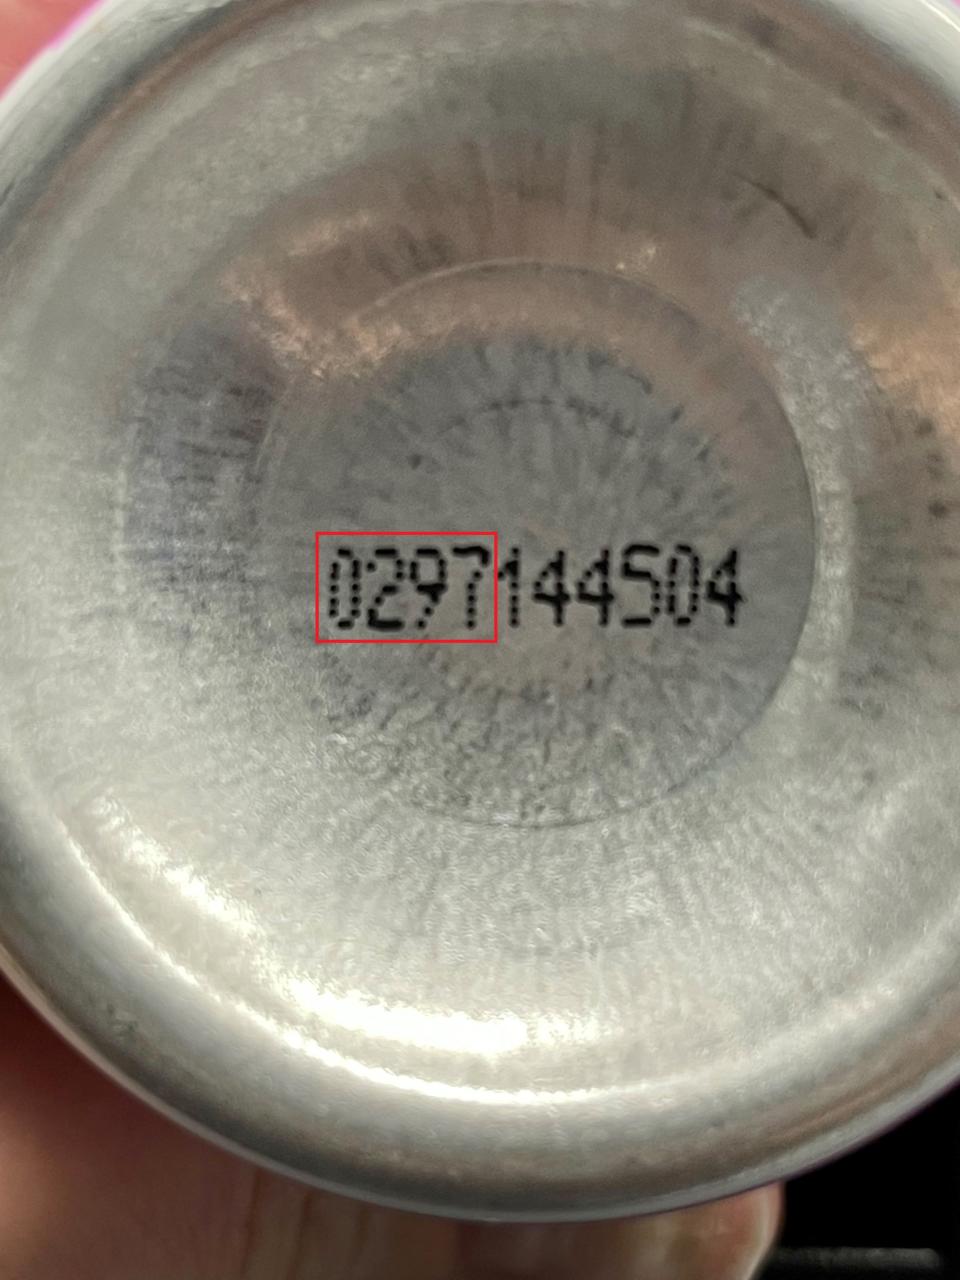 A production code shown at the bottom of an aerosol can.